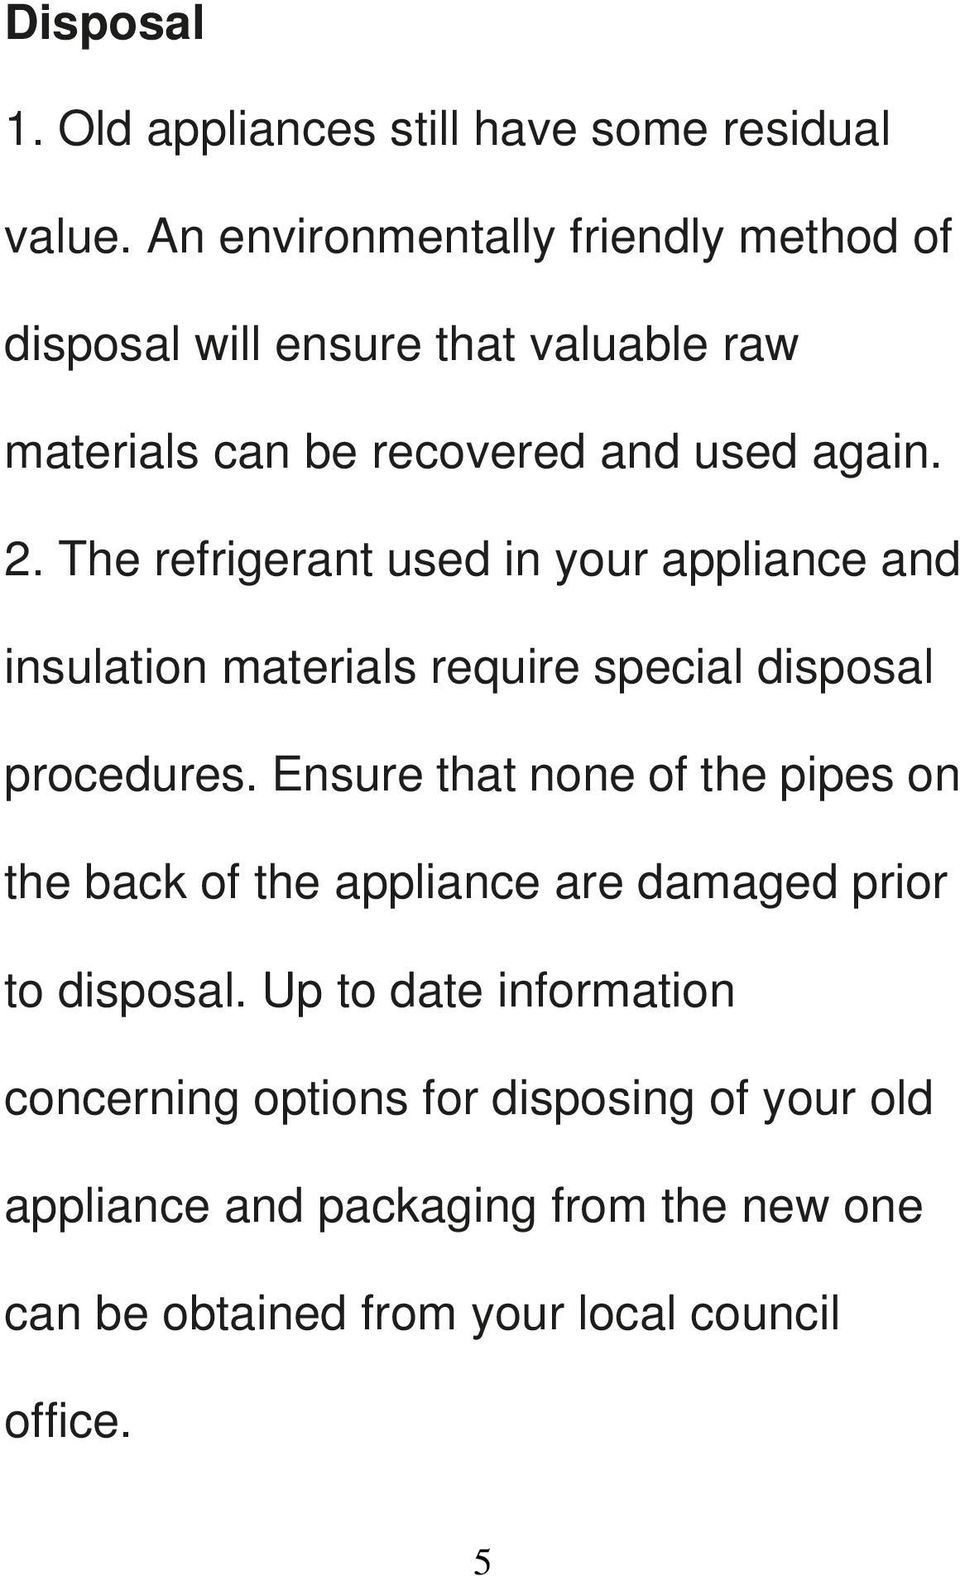 The refrigerant used in your appliance and insulation materials require special disposal procedures.